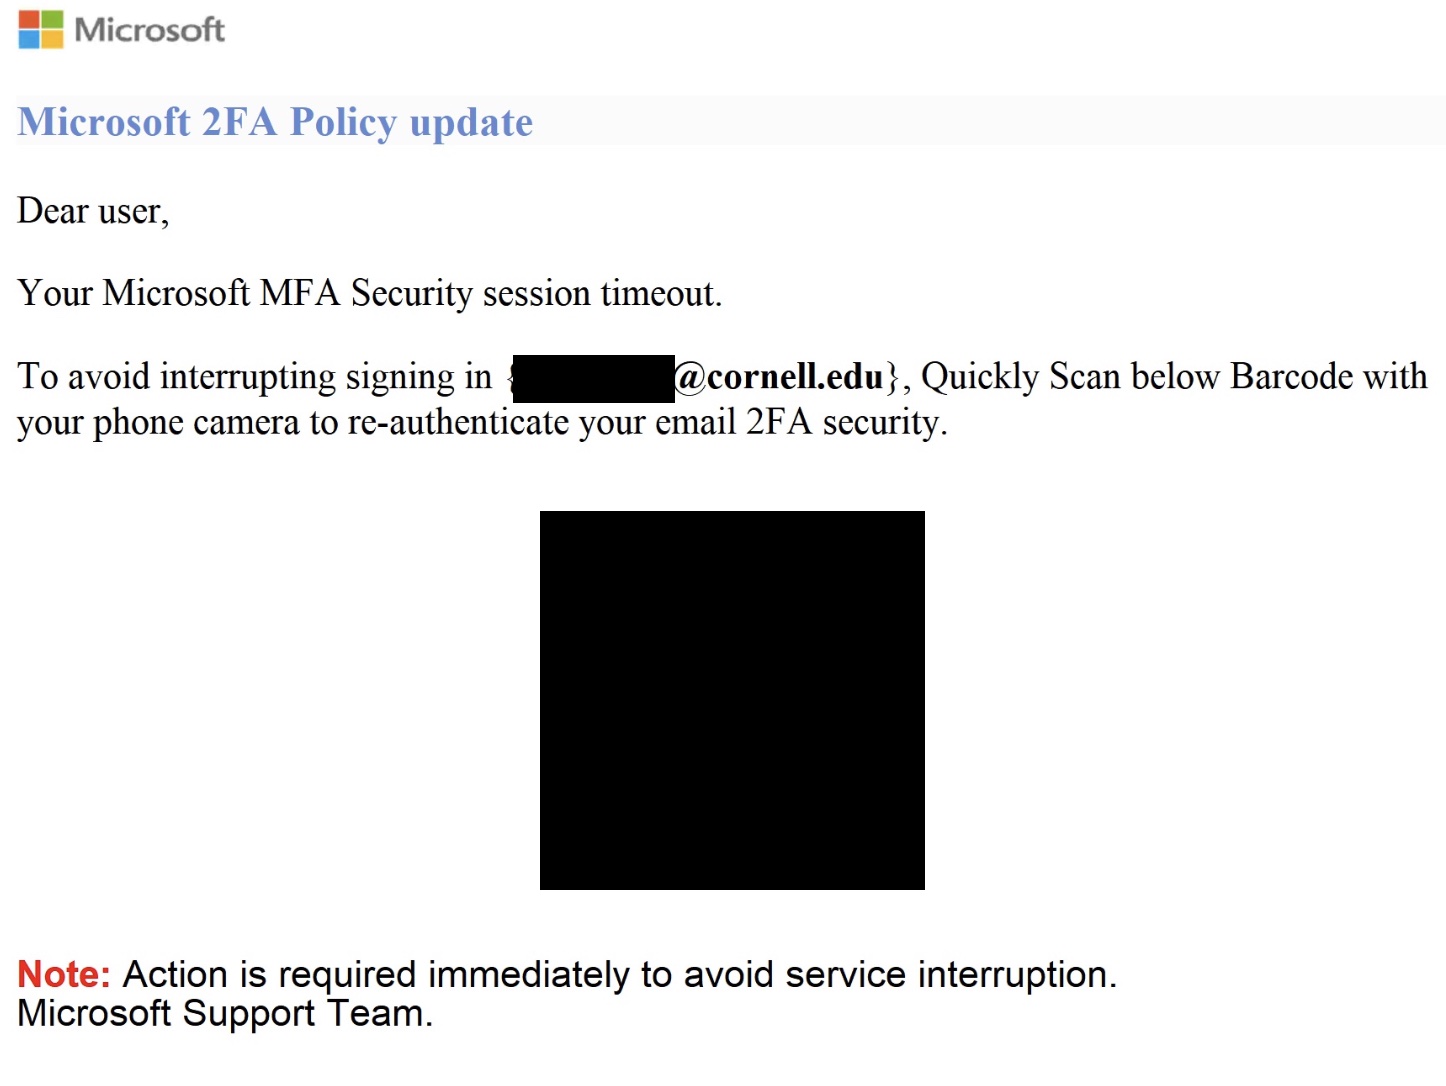 A fake Microsoft-branded notification with the heading "Microsoft 2FA Policy Update" asking the recipient to scan a QR code.